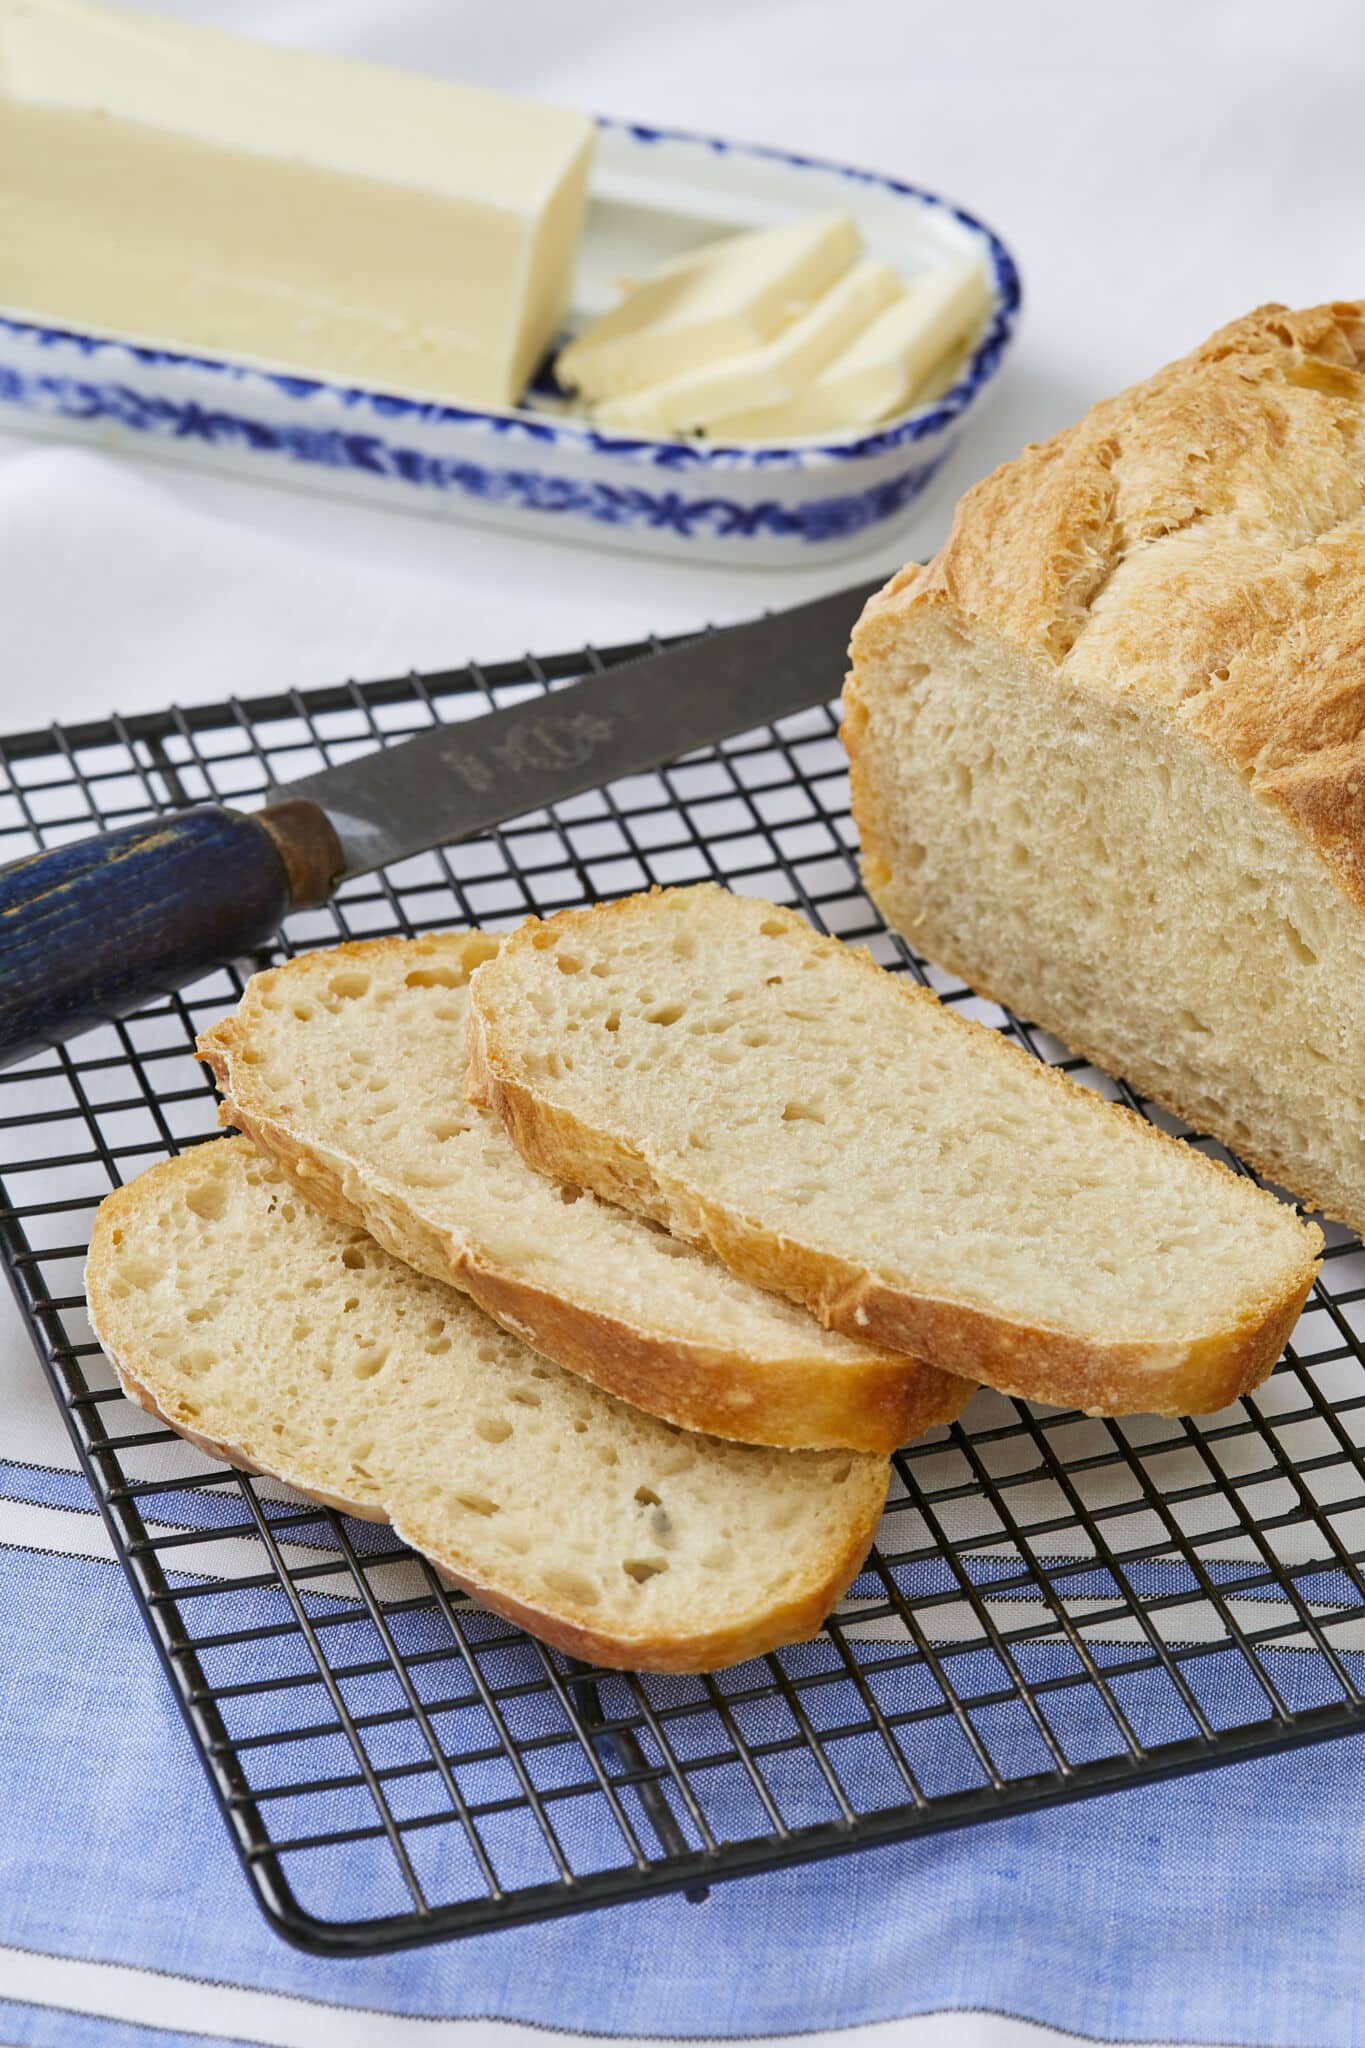 5-Ingredient No-Knead Sandwich Bread is sliced and cooling on a black wire rack with a bread knife next to it. The bread has a golden crisp crust and a soft, tender even crumb. Butter is served on the side to pair with the bread. 